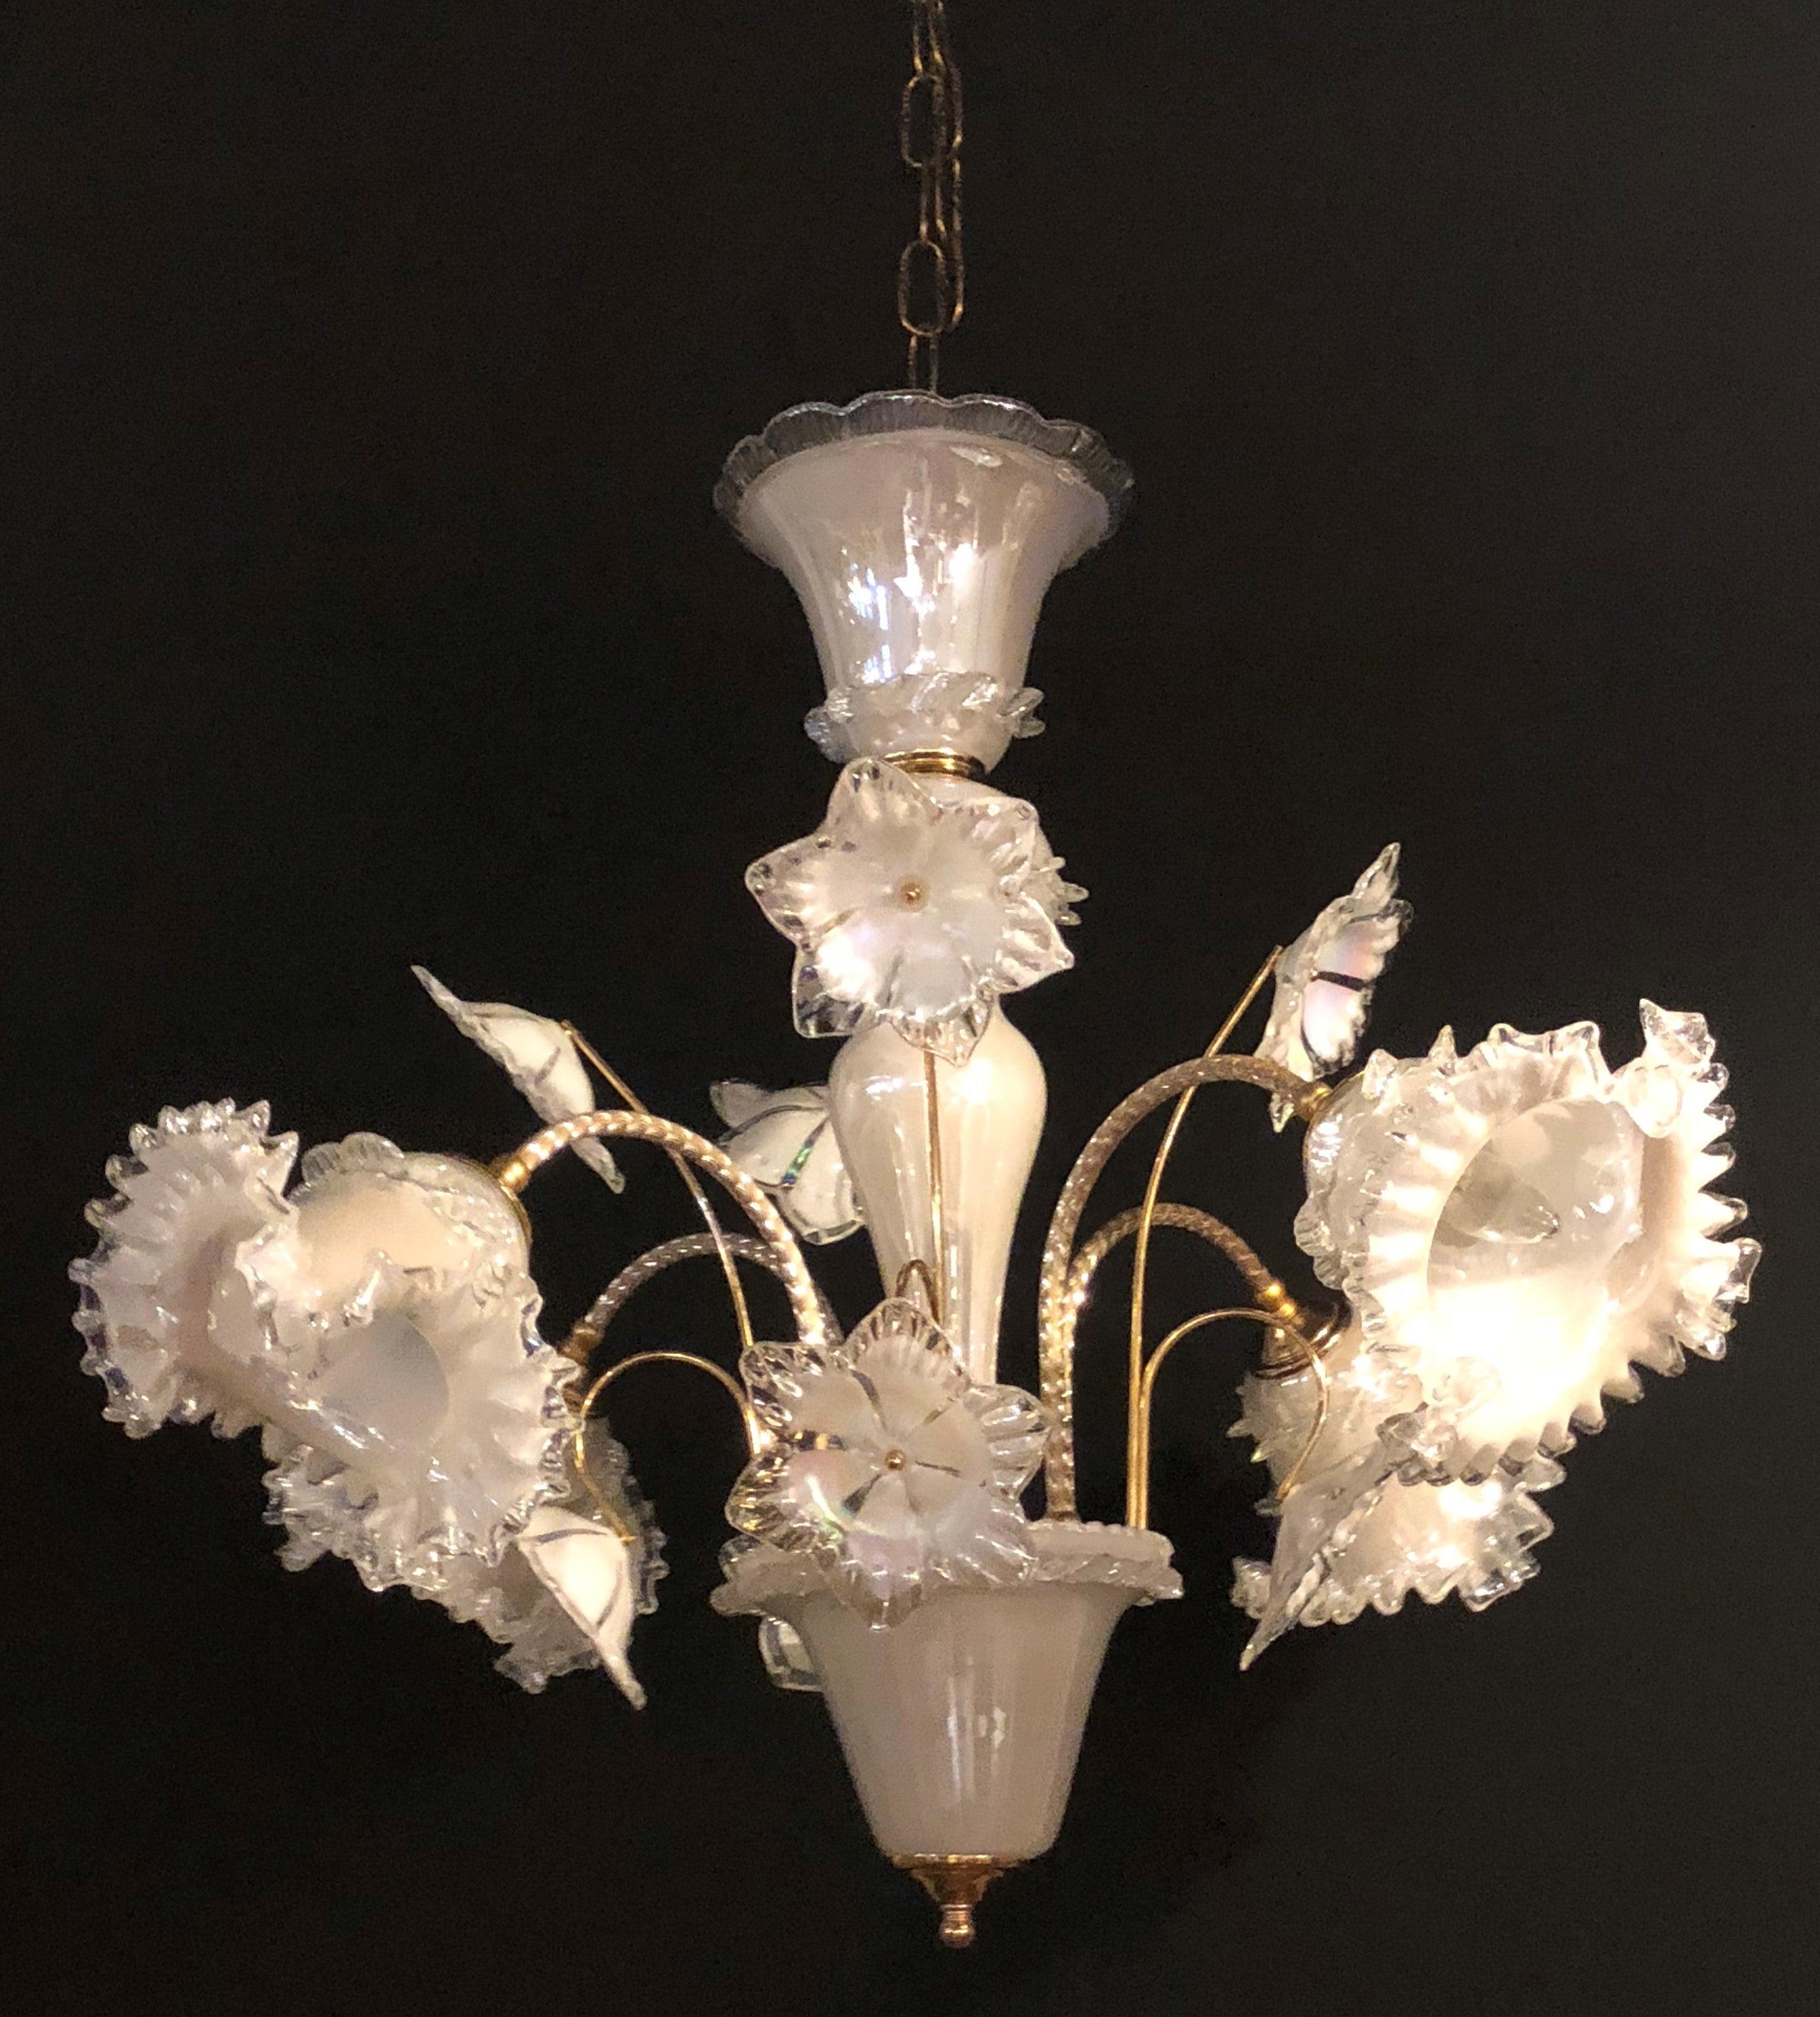 An Italian Murano glass tulip form chandelier. We have three of these fine chandeliers in different colors. The lower pot or vase base having a stem flowing from the bottom with sprouting arms terminating in tulip forms each taking a single light